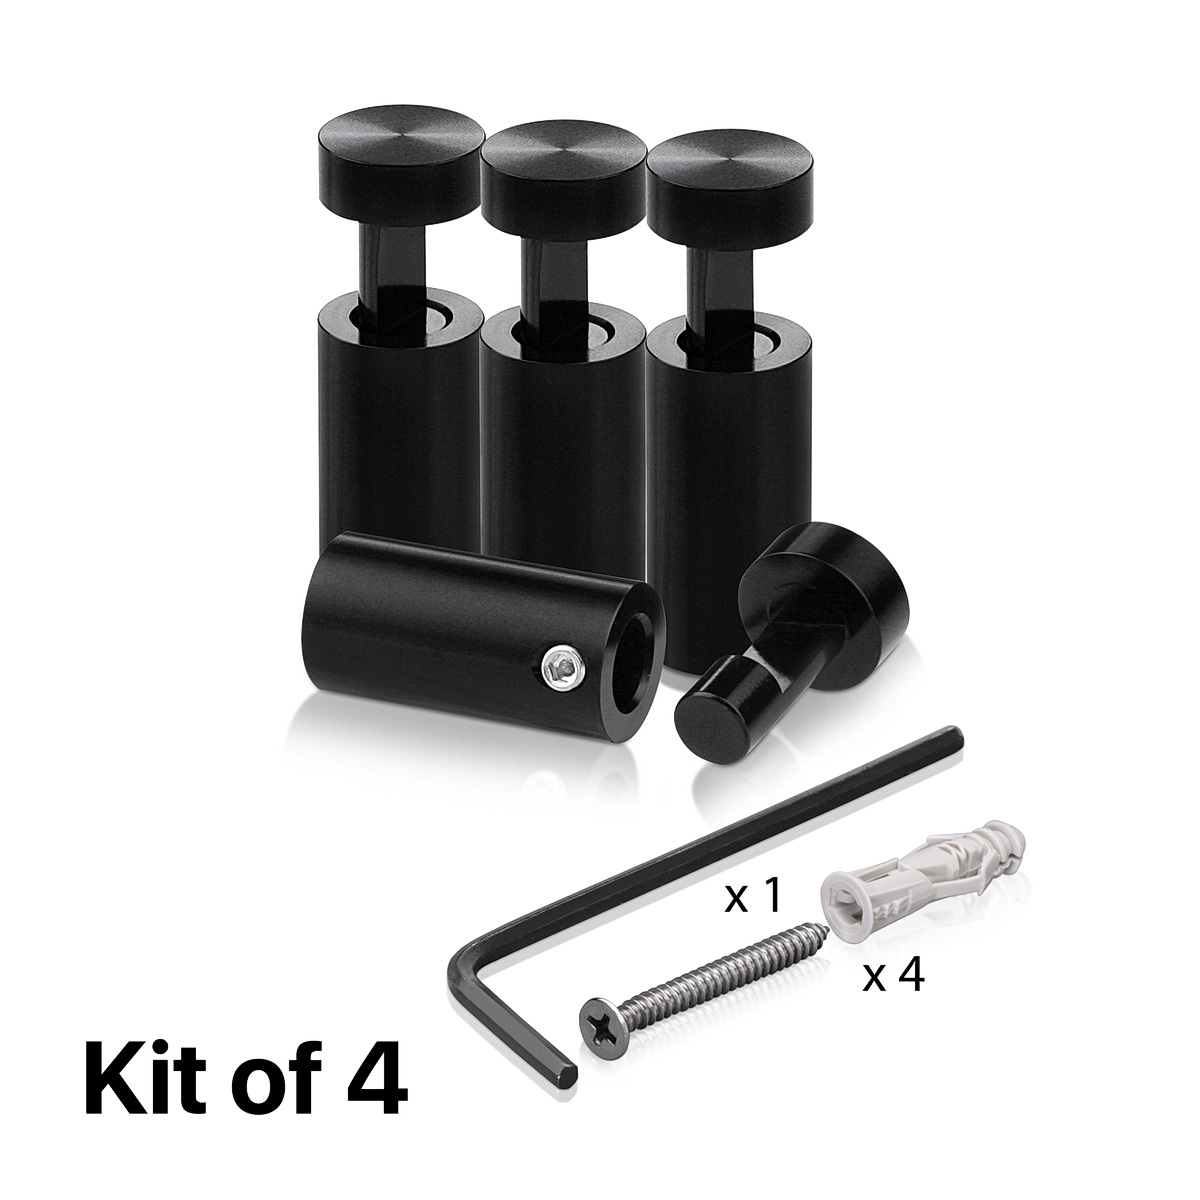 (Set of 4) 1/2'' Diameter X 1''  Barrel Length, Aluminum Black Anodized Finish. Adjustable Edge Grip Standoff with (4) 2208Z Screw and (4) LANC1 Anchor  for concrete/drywall (For Inside Use Only)